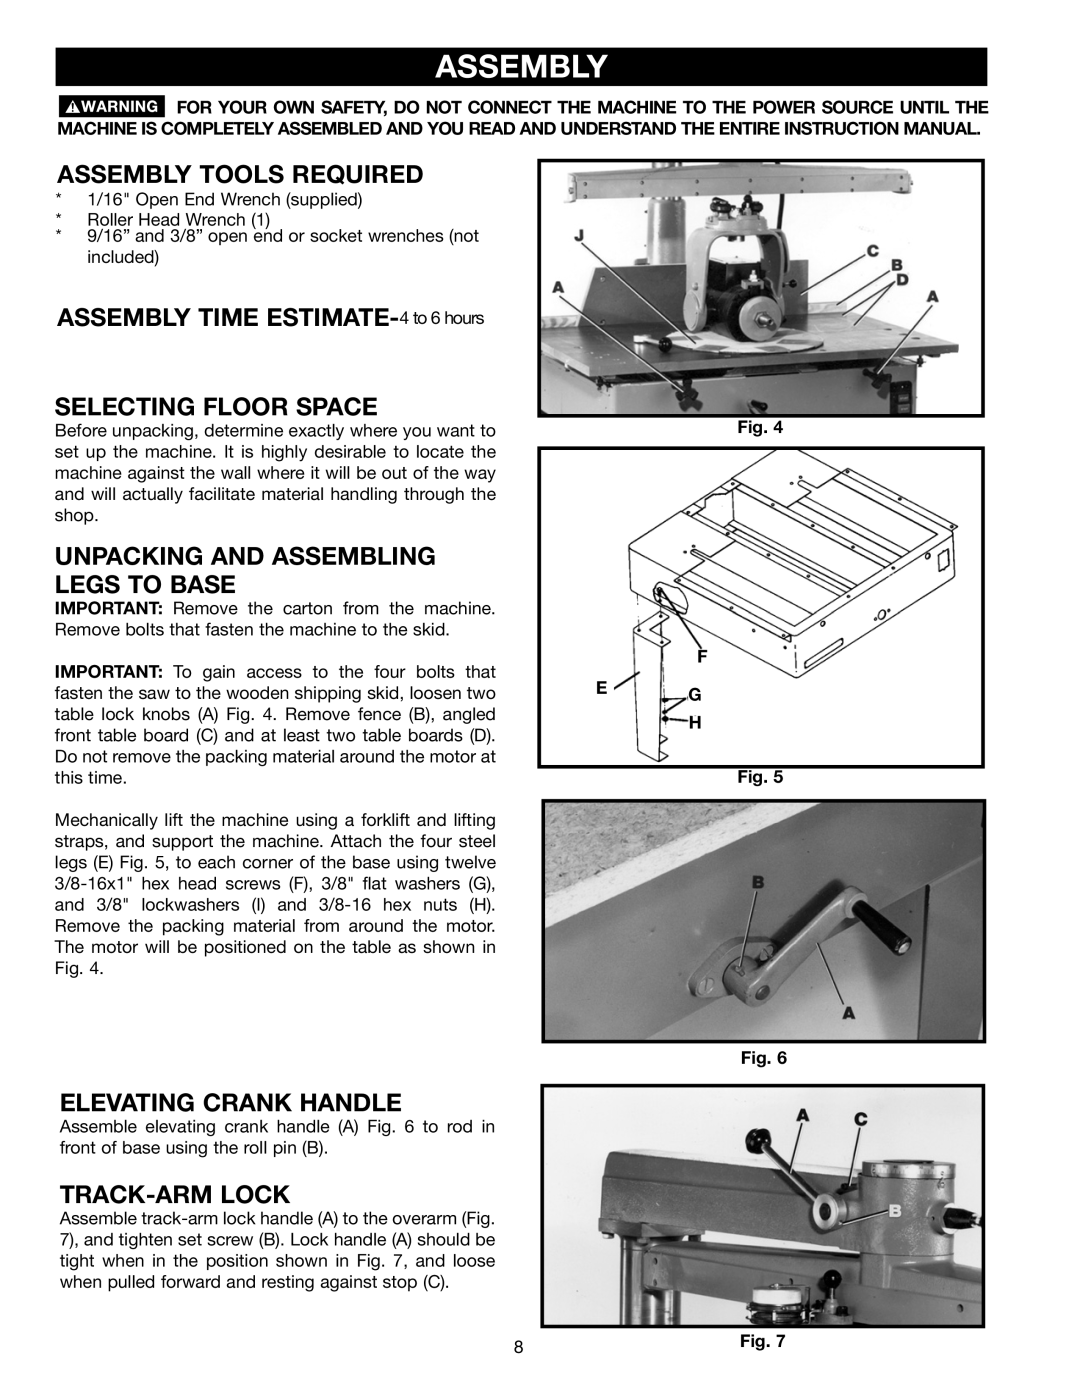 Porter-Cable 33-402 Assembly Tools Required, ASSEMBLY TIME ESTIMATE-4 to 6 hours SELECTING FLOOR SPACE, Track-Arm Lock 